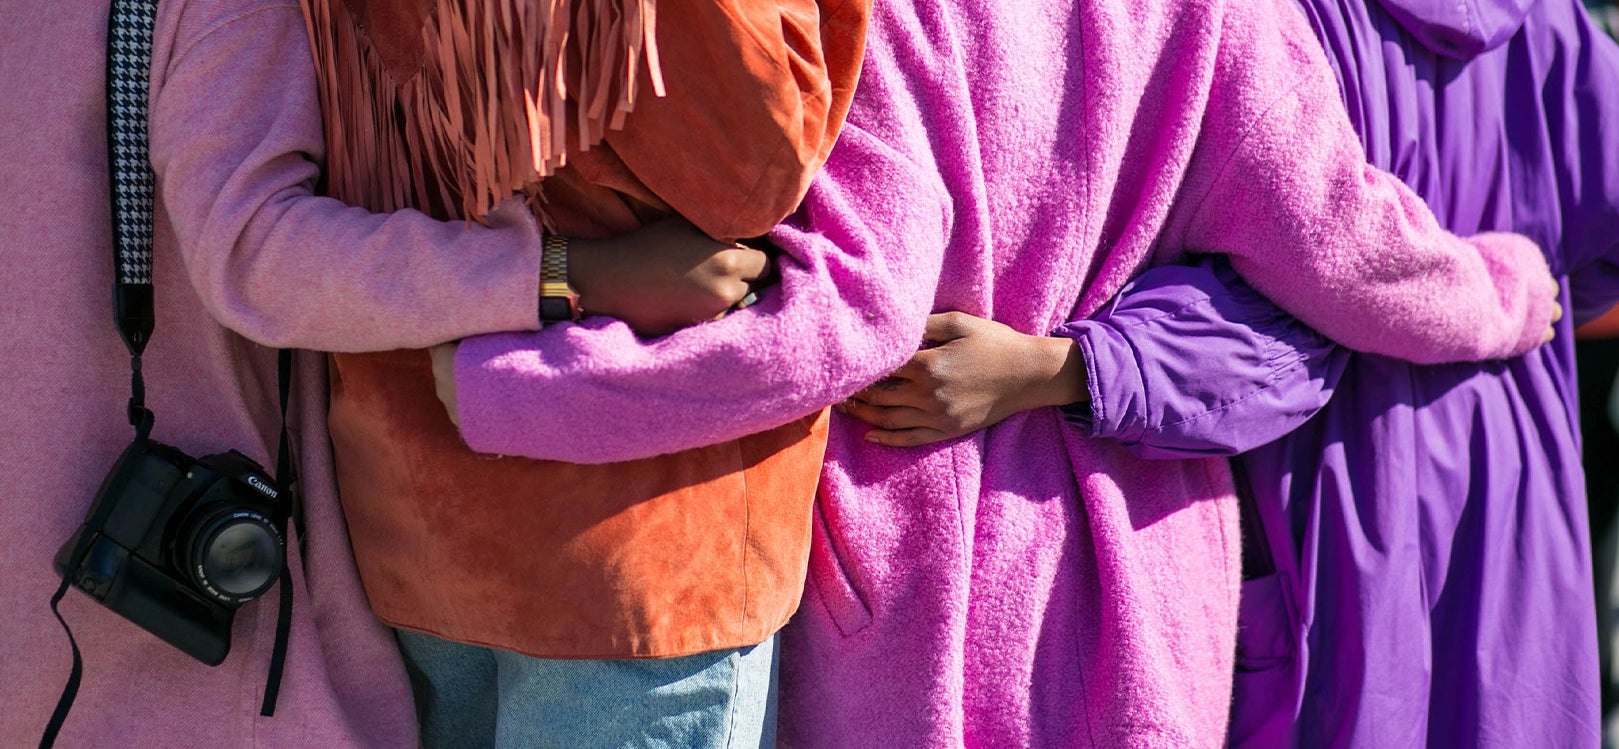 Mid-shot of four people wearing colourful fluffy coats holding each other's backs